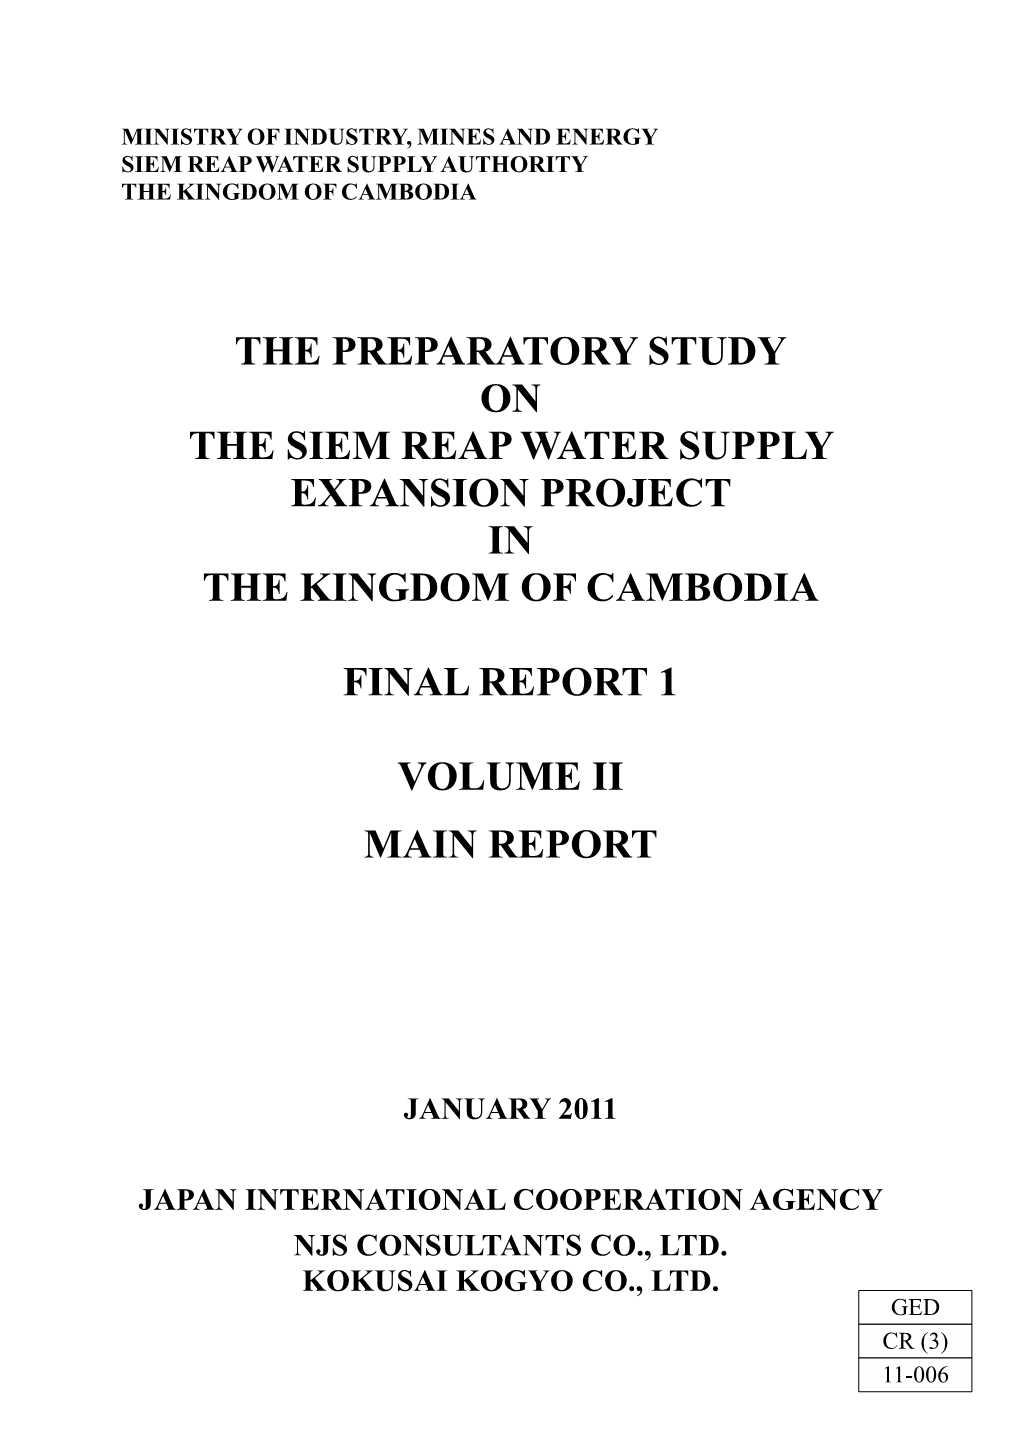 The Preparatory Study on the Siem Reap Water Supply Expansion Project in the Kingdom of Cambodia